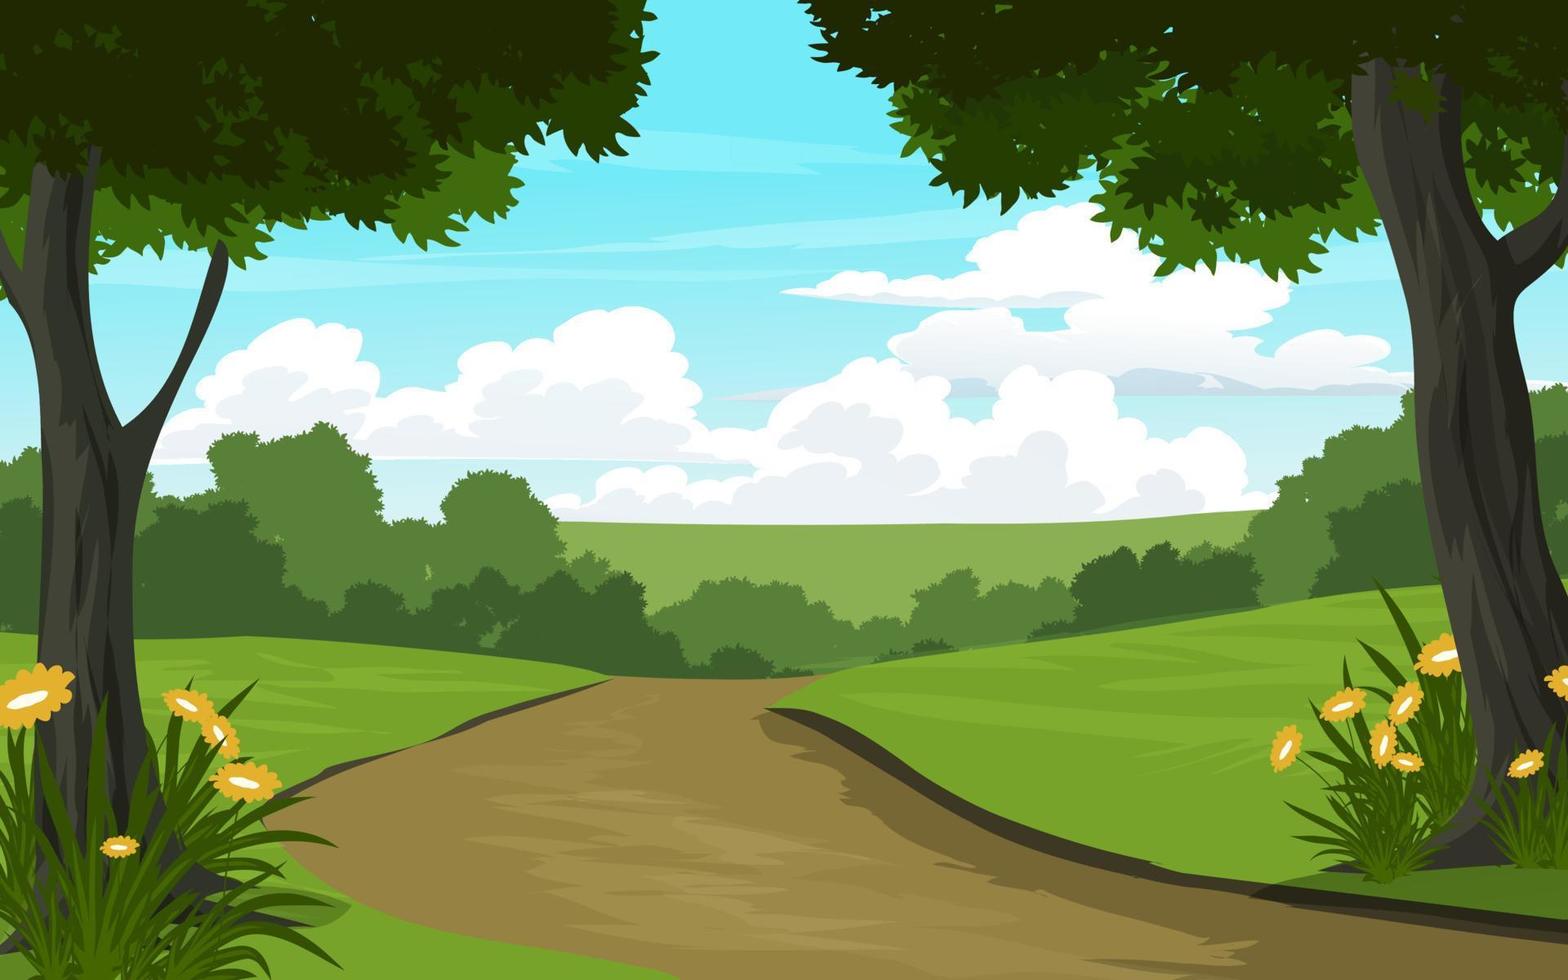 Rural landscape with road and forest vector